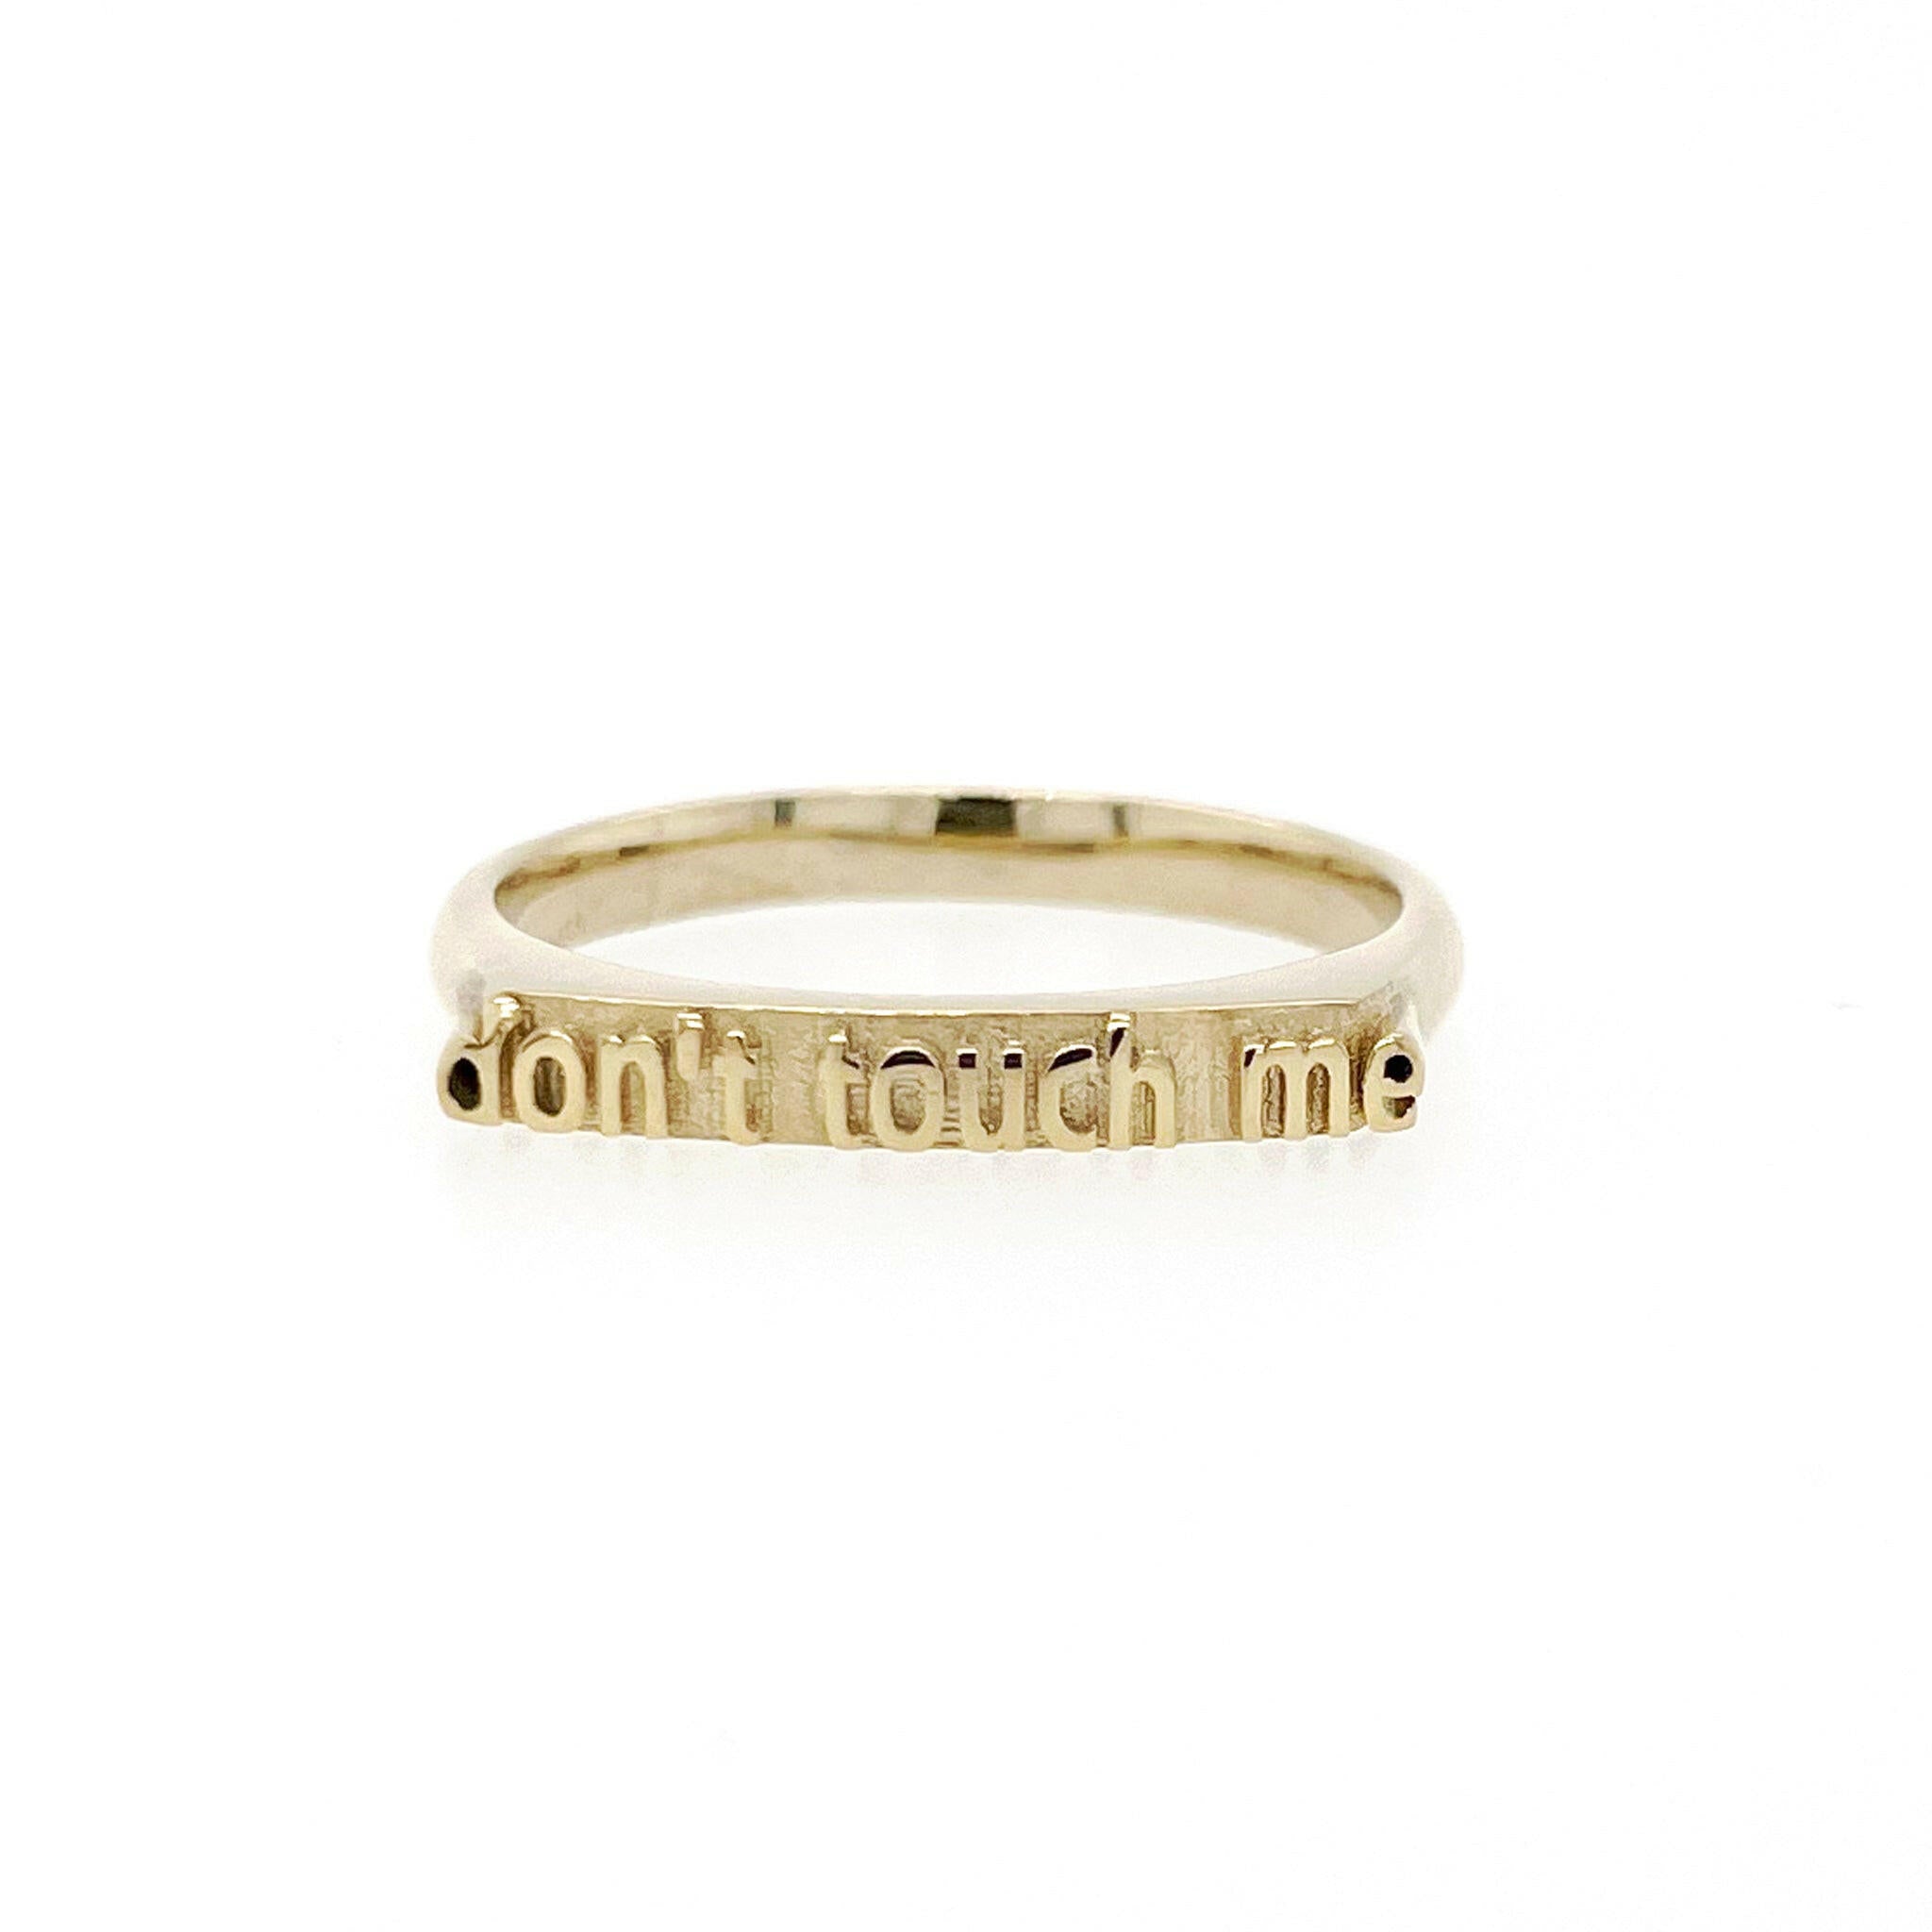 front view of 14 karat yellow gold ring with text that reads "don't touch me"